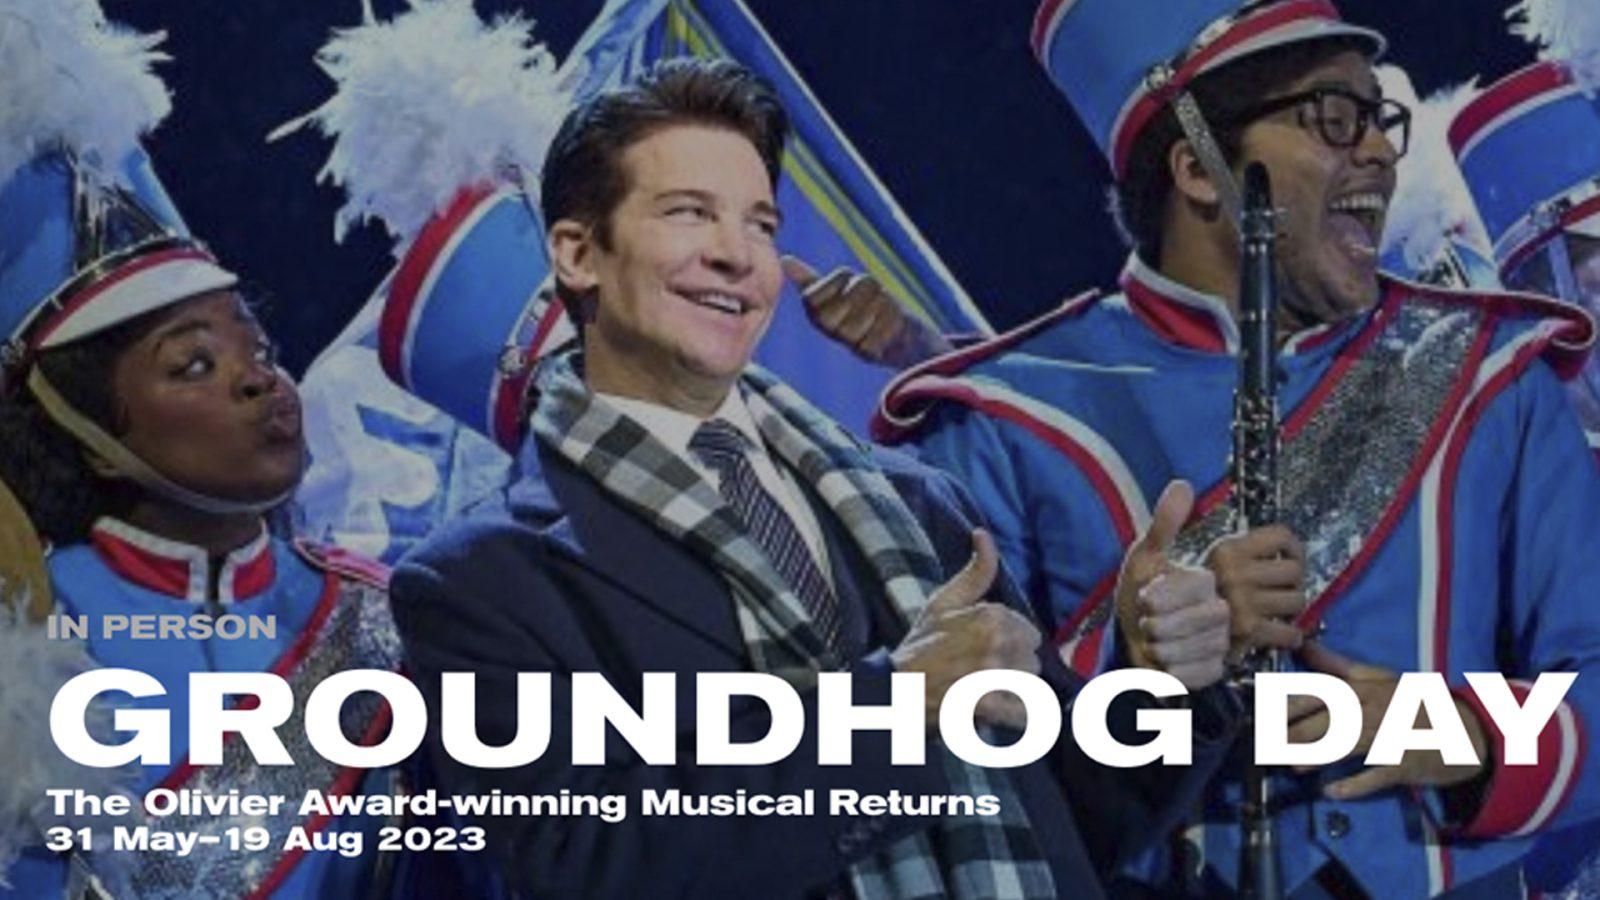 Groundhog Day, Olivier Award-winning (Best New Musical, Best Actor) musical sensation based on the 1993 hit film returns to The Old Vic this summer.